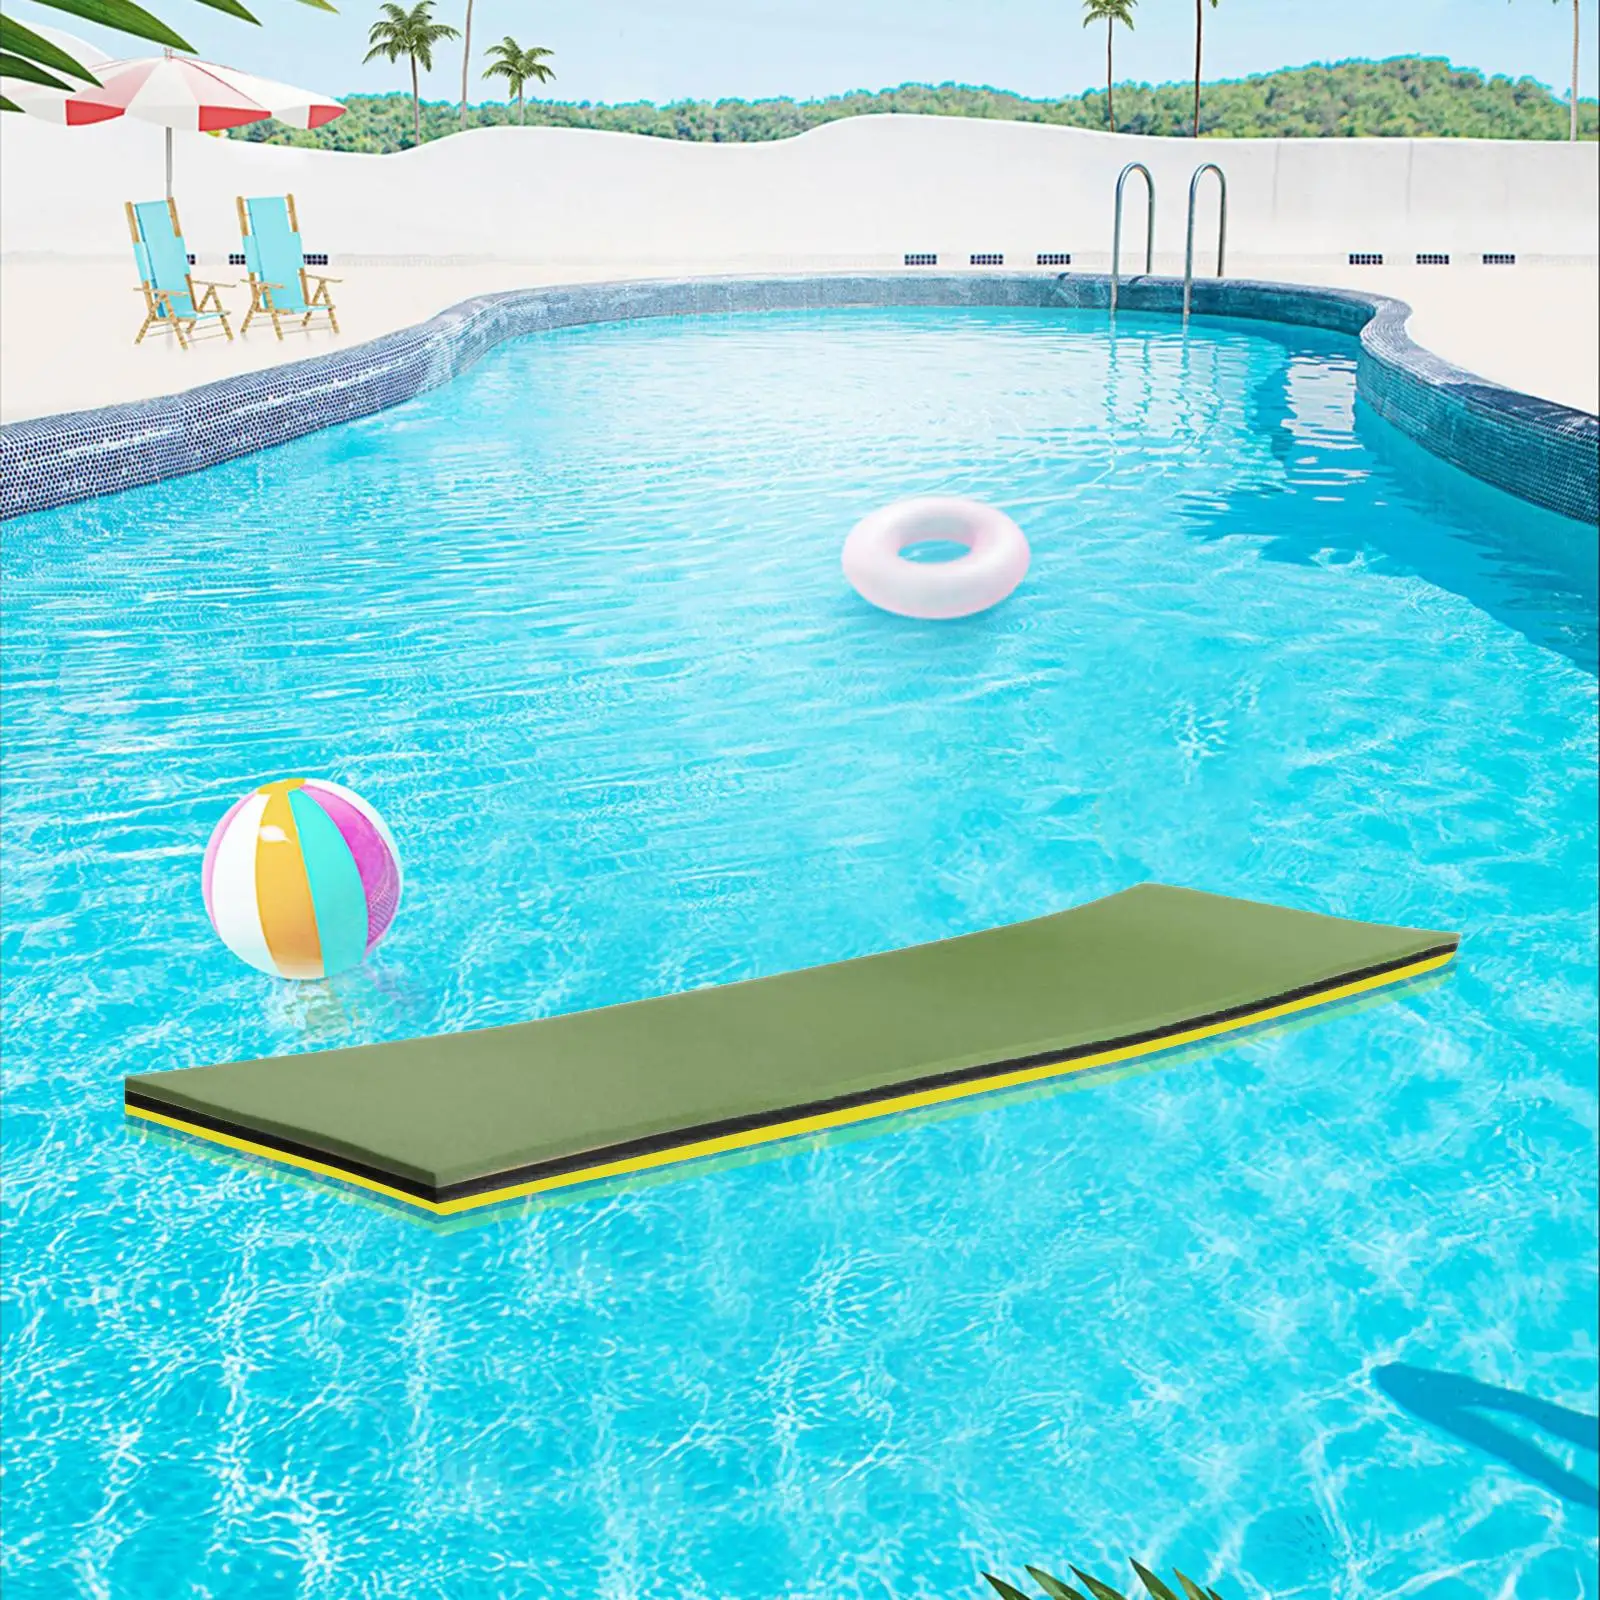 Floating Mat Water Pad Cushion 43x15.7x1.3inch for Water Parks, Pools, Lakes, Beaches and Sea Sturdy Xpe Foam Mat Water Bed